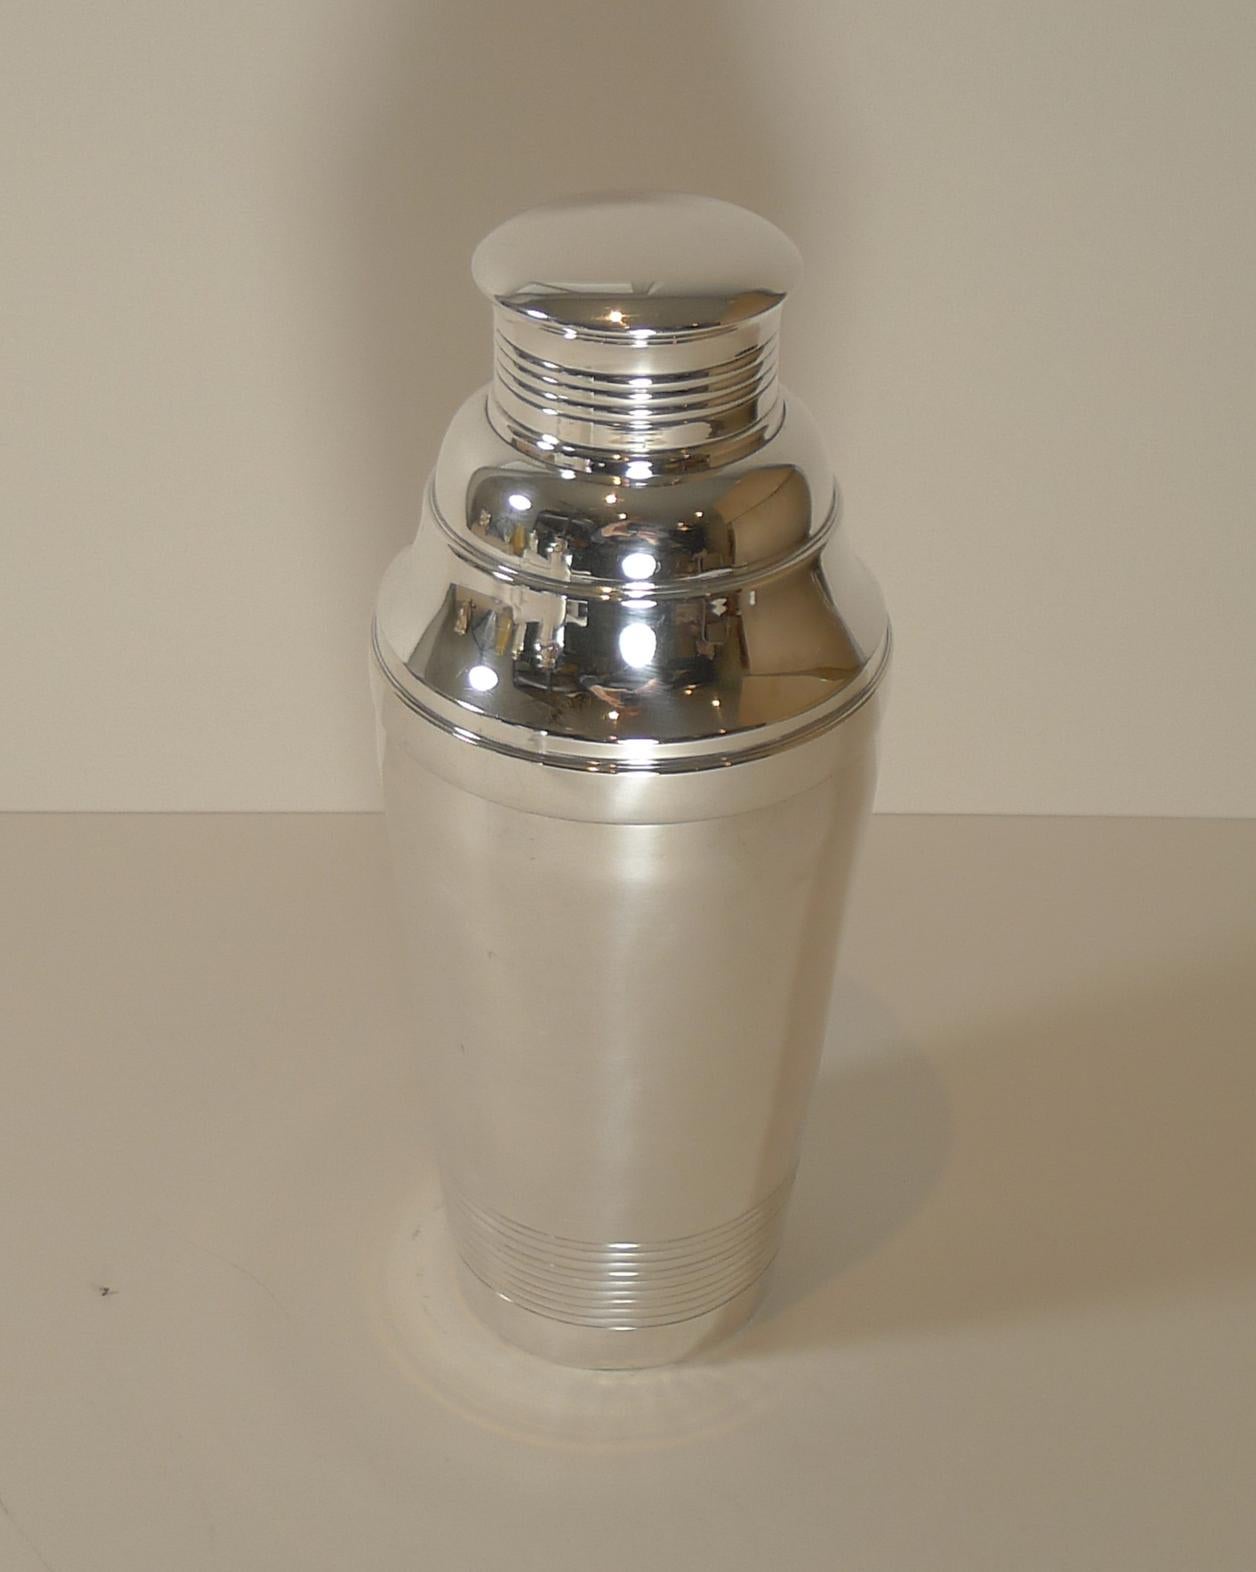 A superb large antique cocktail shaker in silver plate having been professionally cleaned and polished in our silversmith's workshop.

The underside is fully marked for Maison Pierre Bognon of 7 Rue Saint Sébastien, Paris who was only in operation